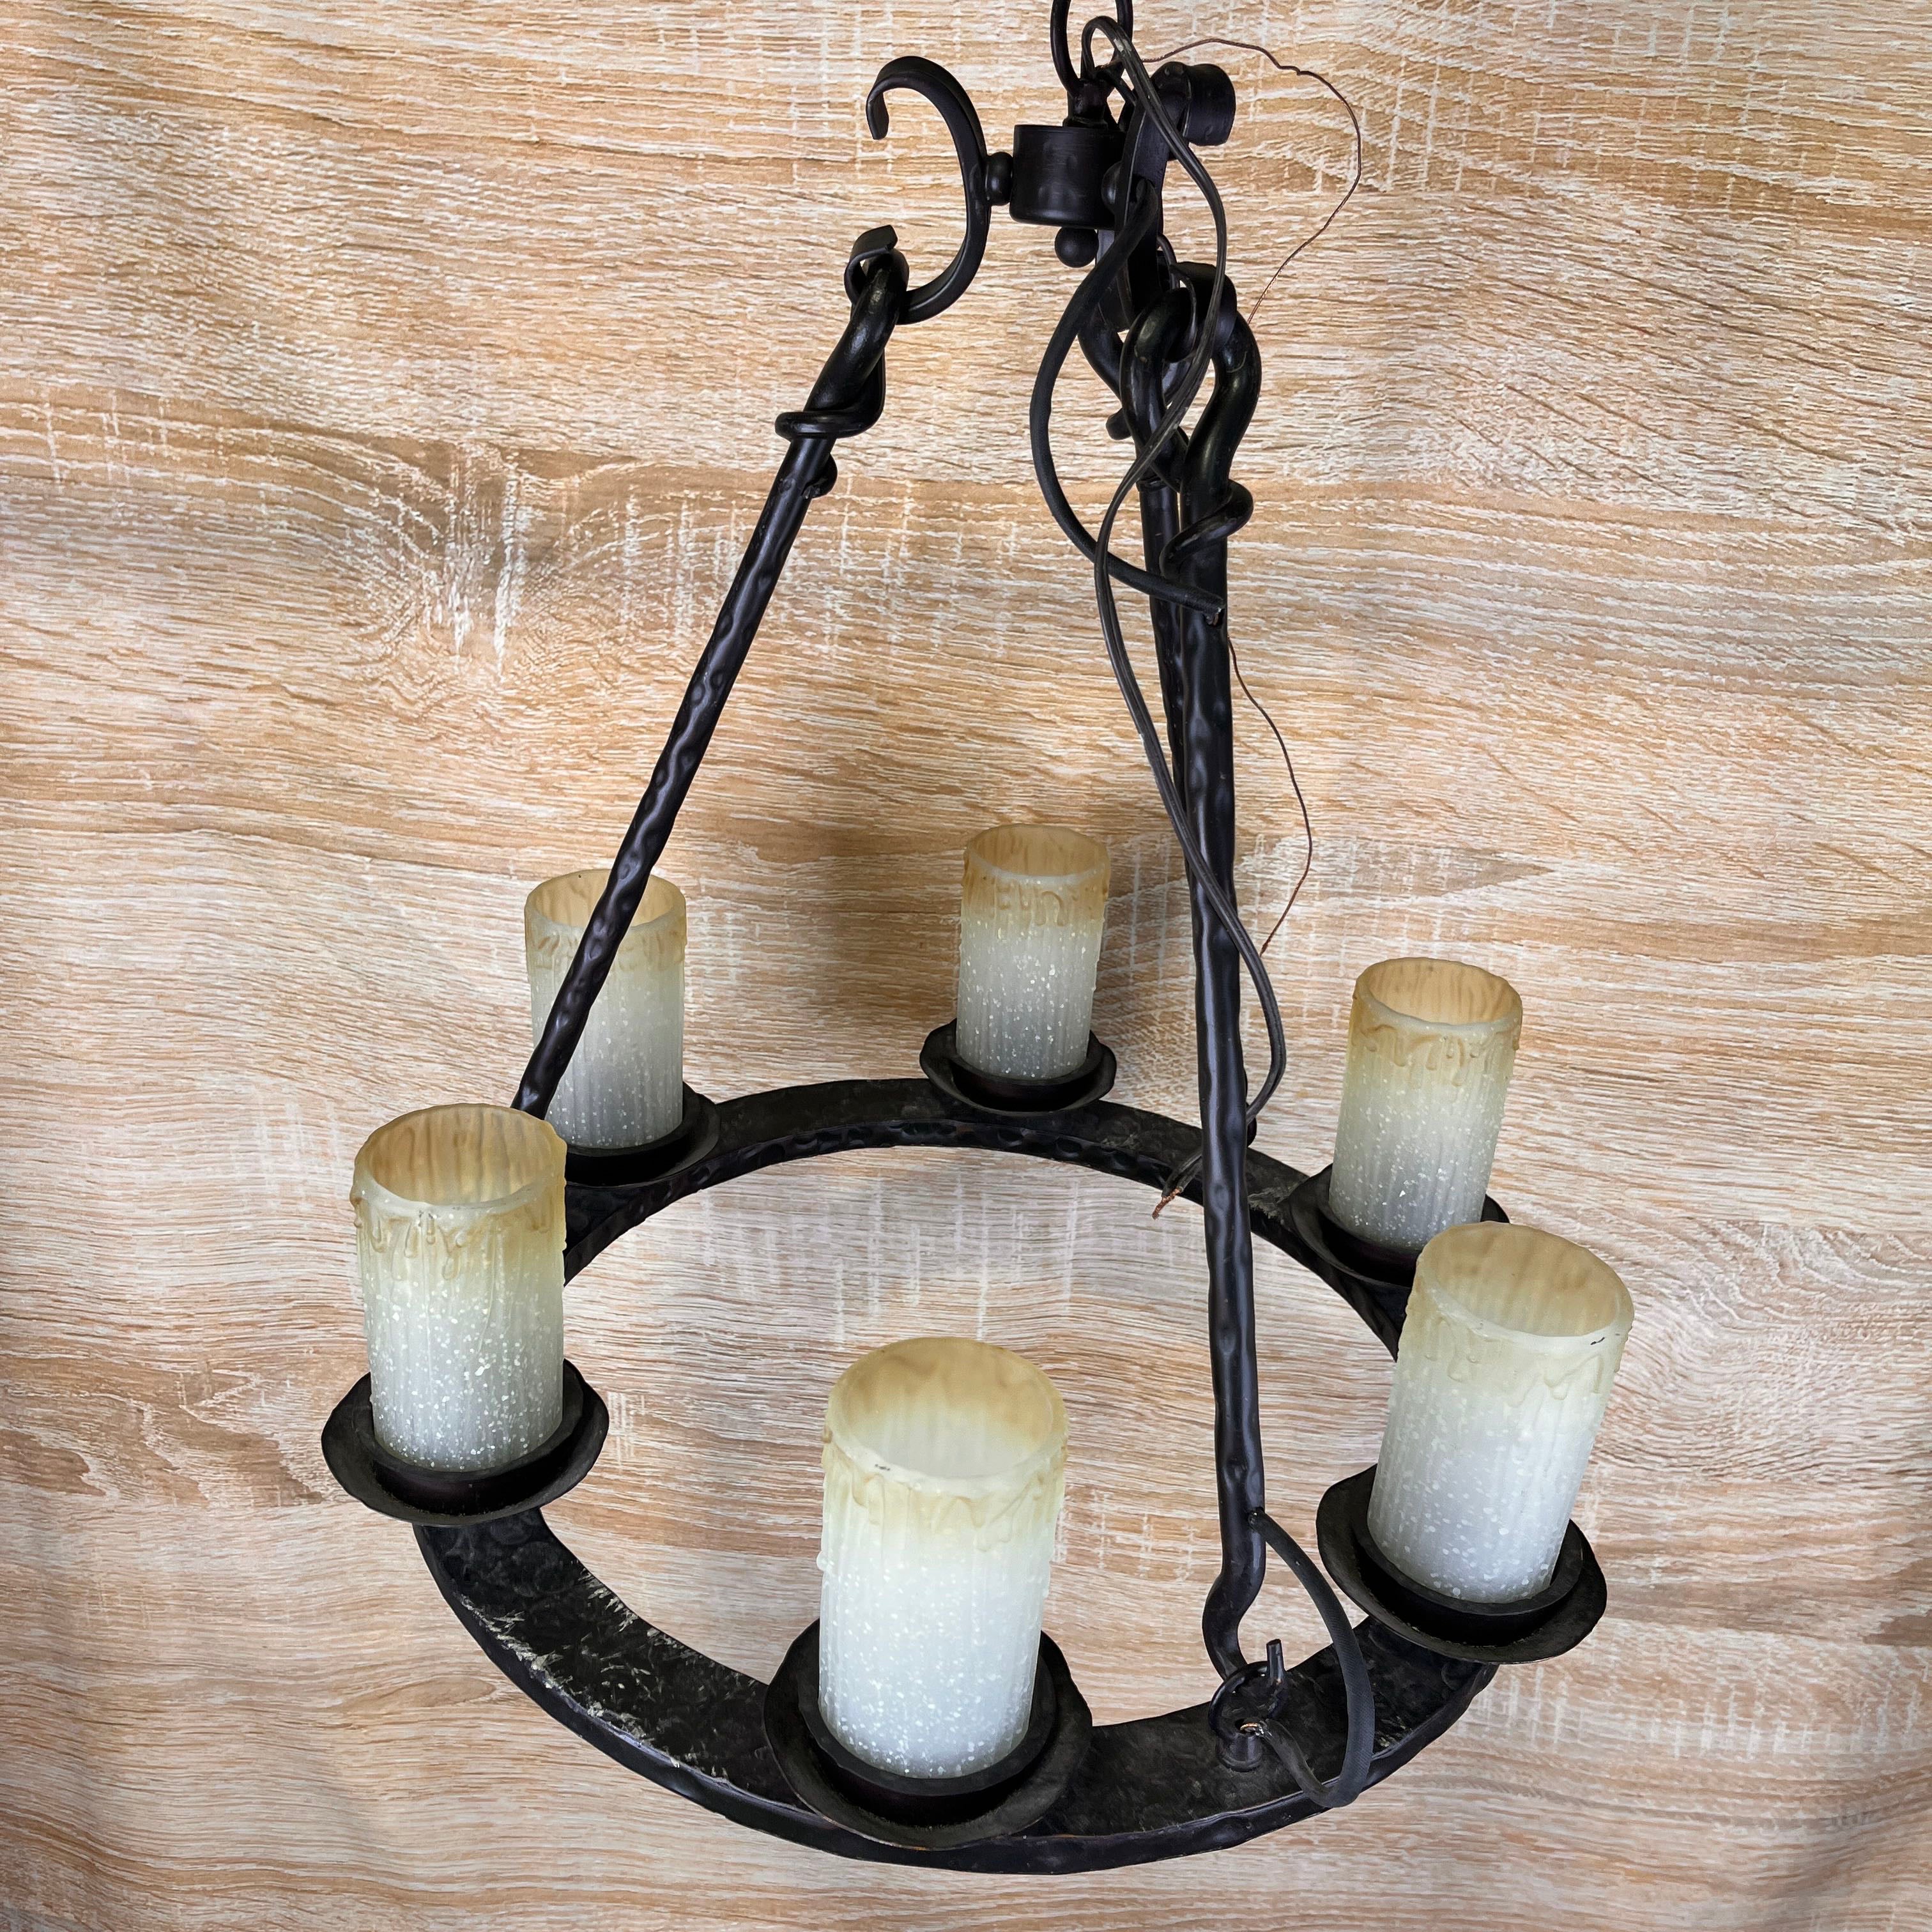 Rowan 6-Light Oil Rubbed Bronze and Glass Candle Style Chandelier